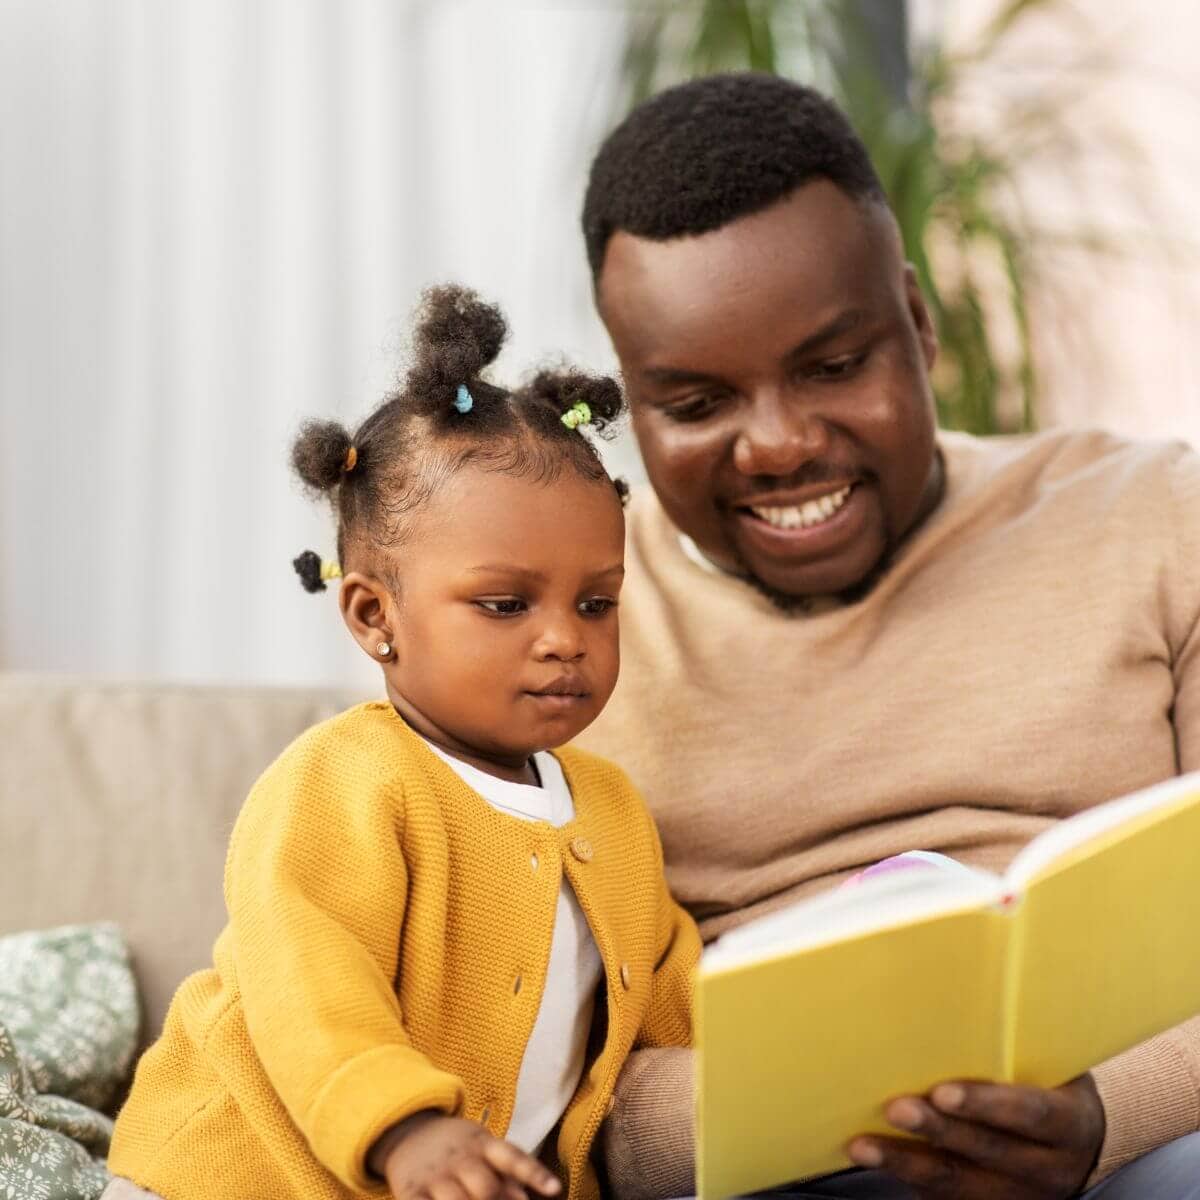 An African American dad is sitting down with his young daughter on a couch. He is holding a light yellow book and they are both looking at it.